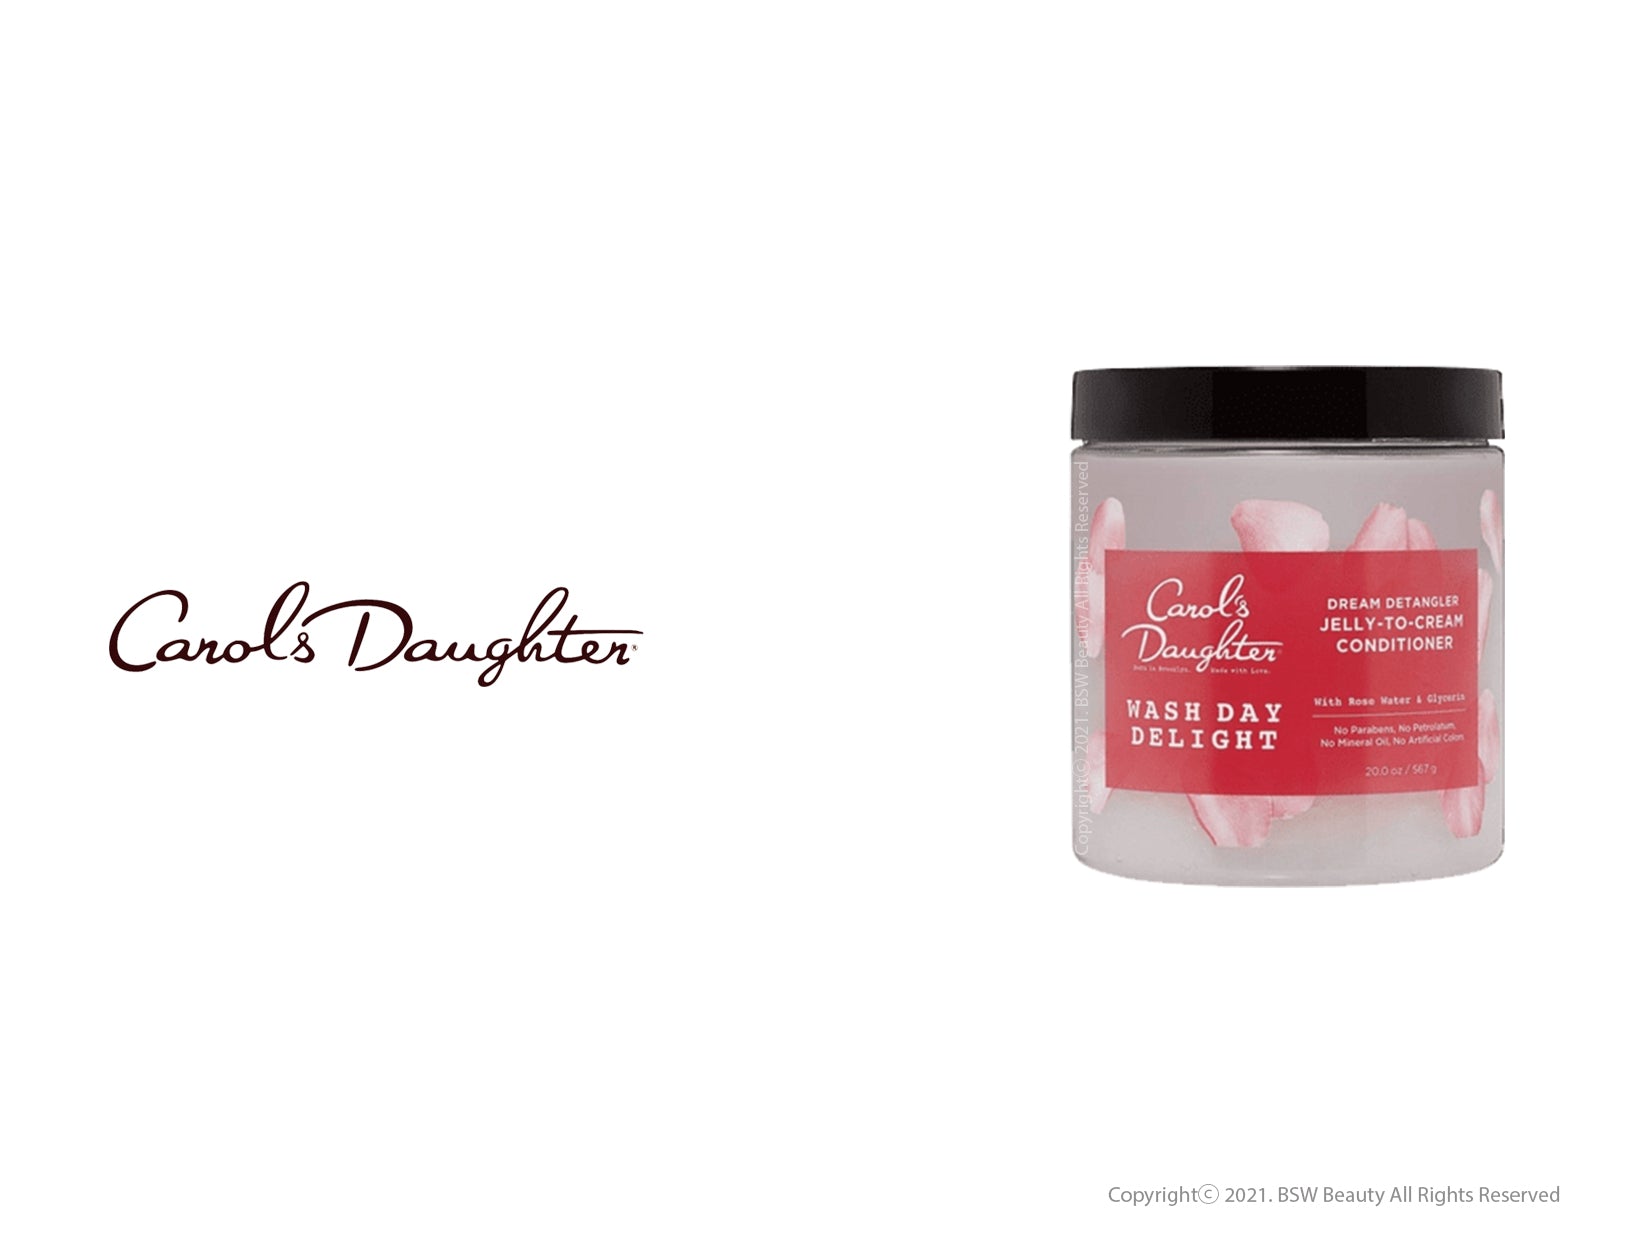 CAROLS DAUGHTER WASH DAY DELIGHT CONDITIONER WITH ROSE WATER 20oz